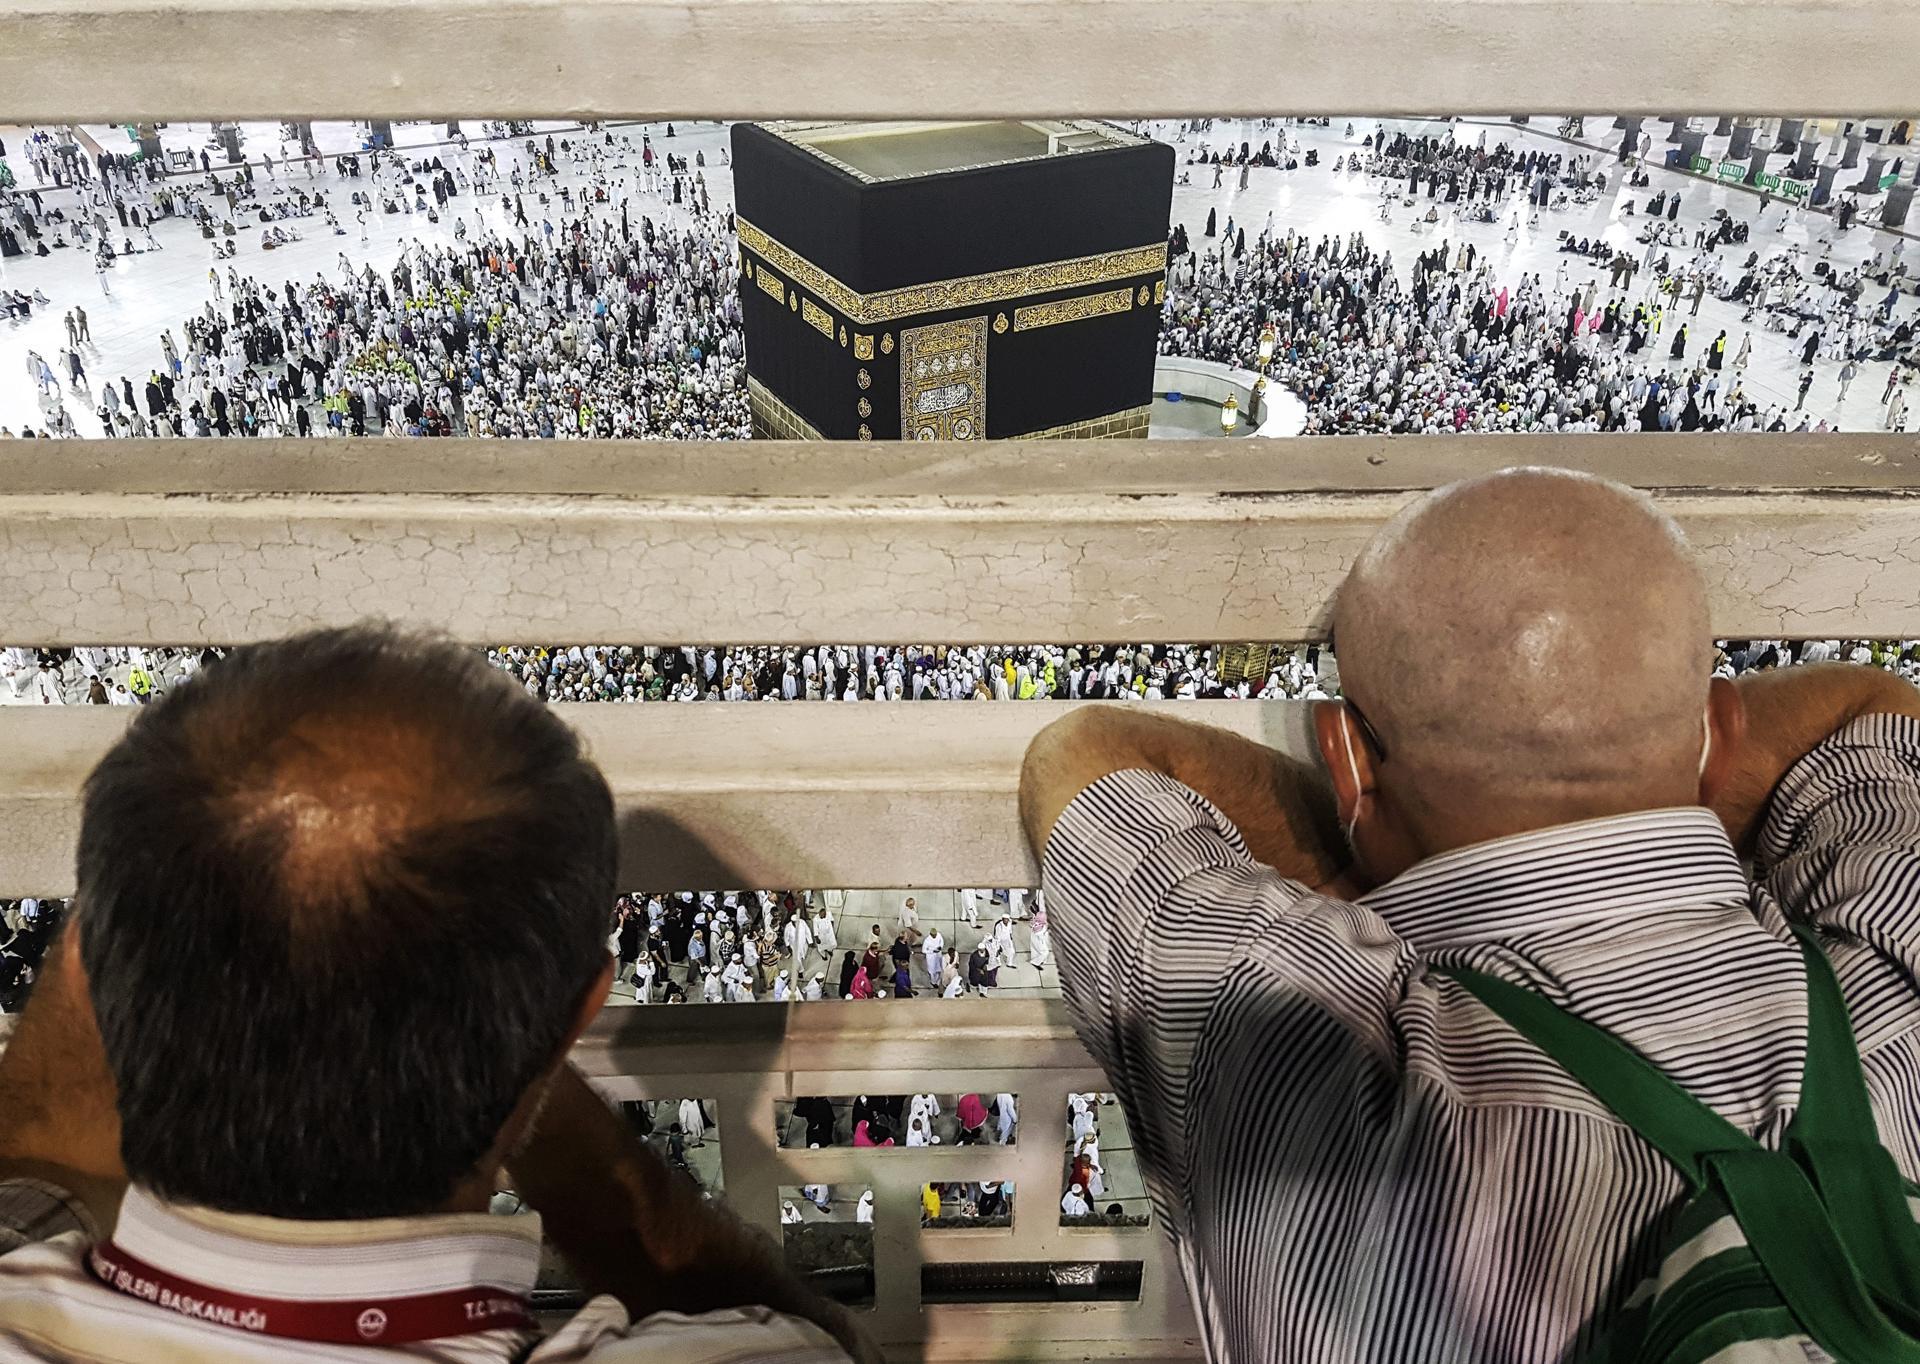 Two men look at the Kaaba as pilgrims circumvent it as they perform last 'tawaf' (circumambulate the Kaaba seven times in a counterclockwise direction) and important ritual to finish the hajj pilgrimage at the Masjid al-Haram (Grand Mosque), during Hajj at the Holy City of Mecca, Saudi Arabia, 14 September 2016. EPA/FAZRY ISMAIL
